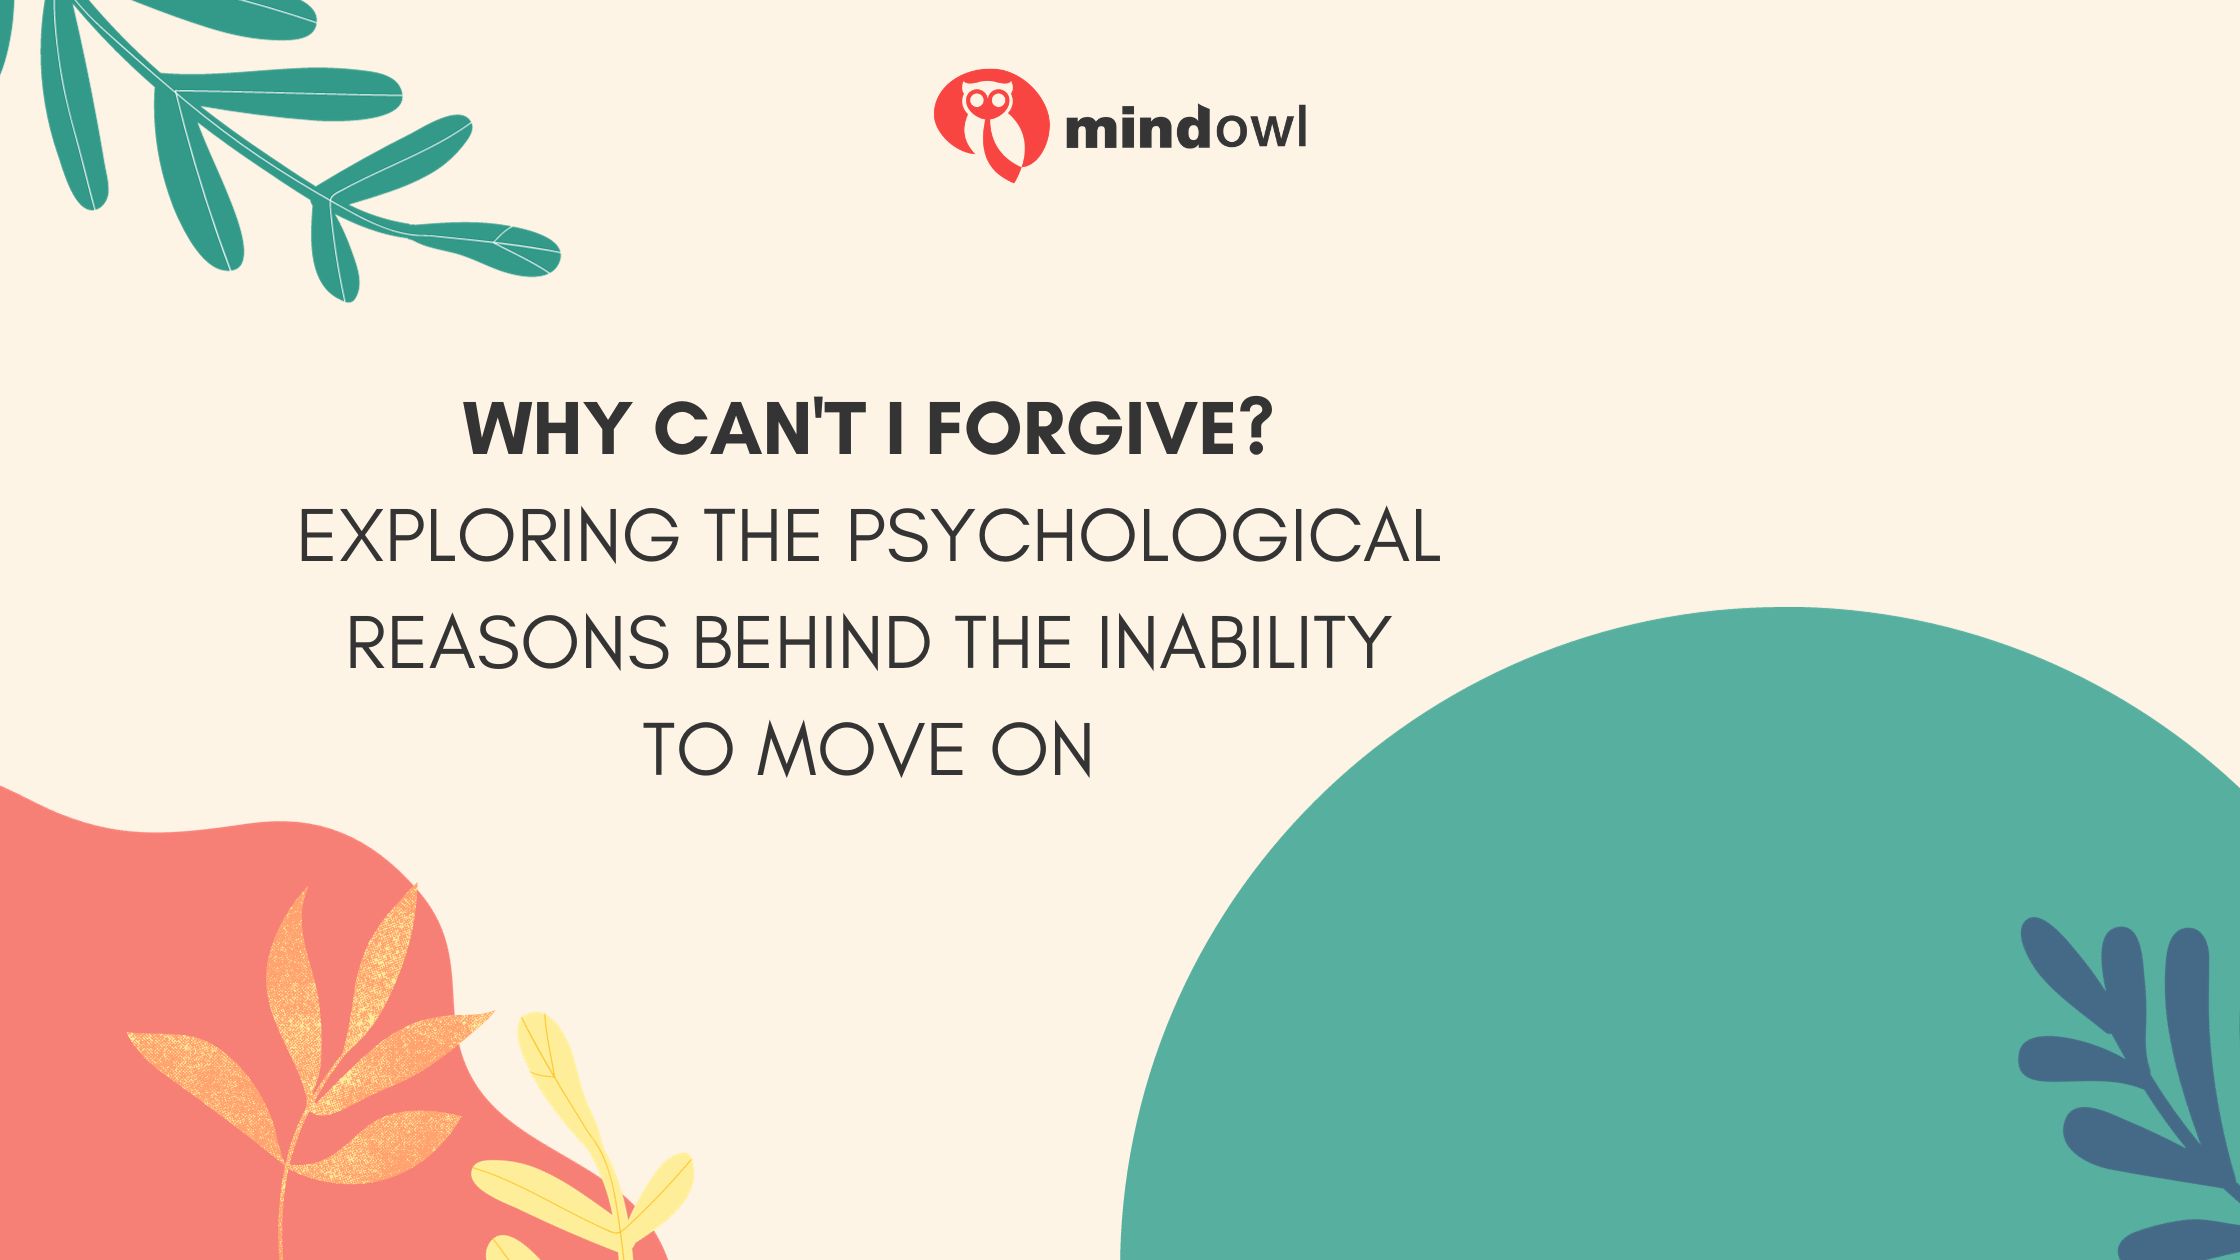 Why Can’t I Forgive? Exploring The Psychological Reasons Behind The Inability To Move On